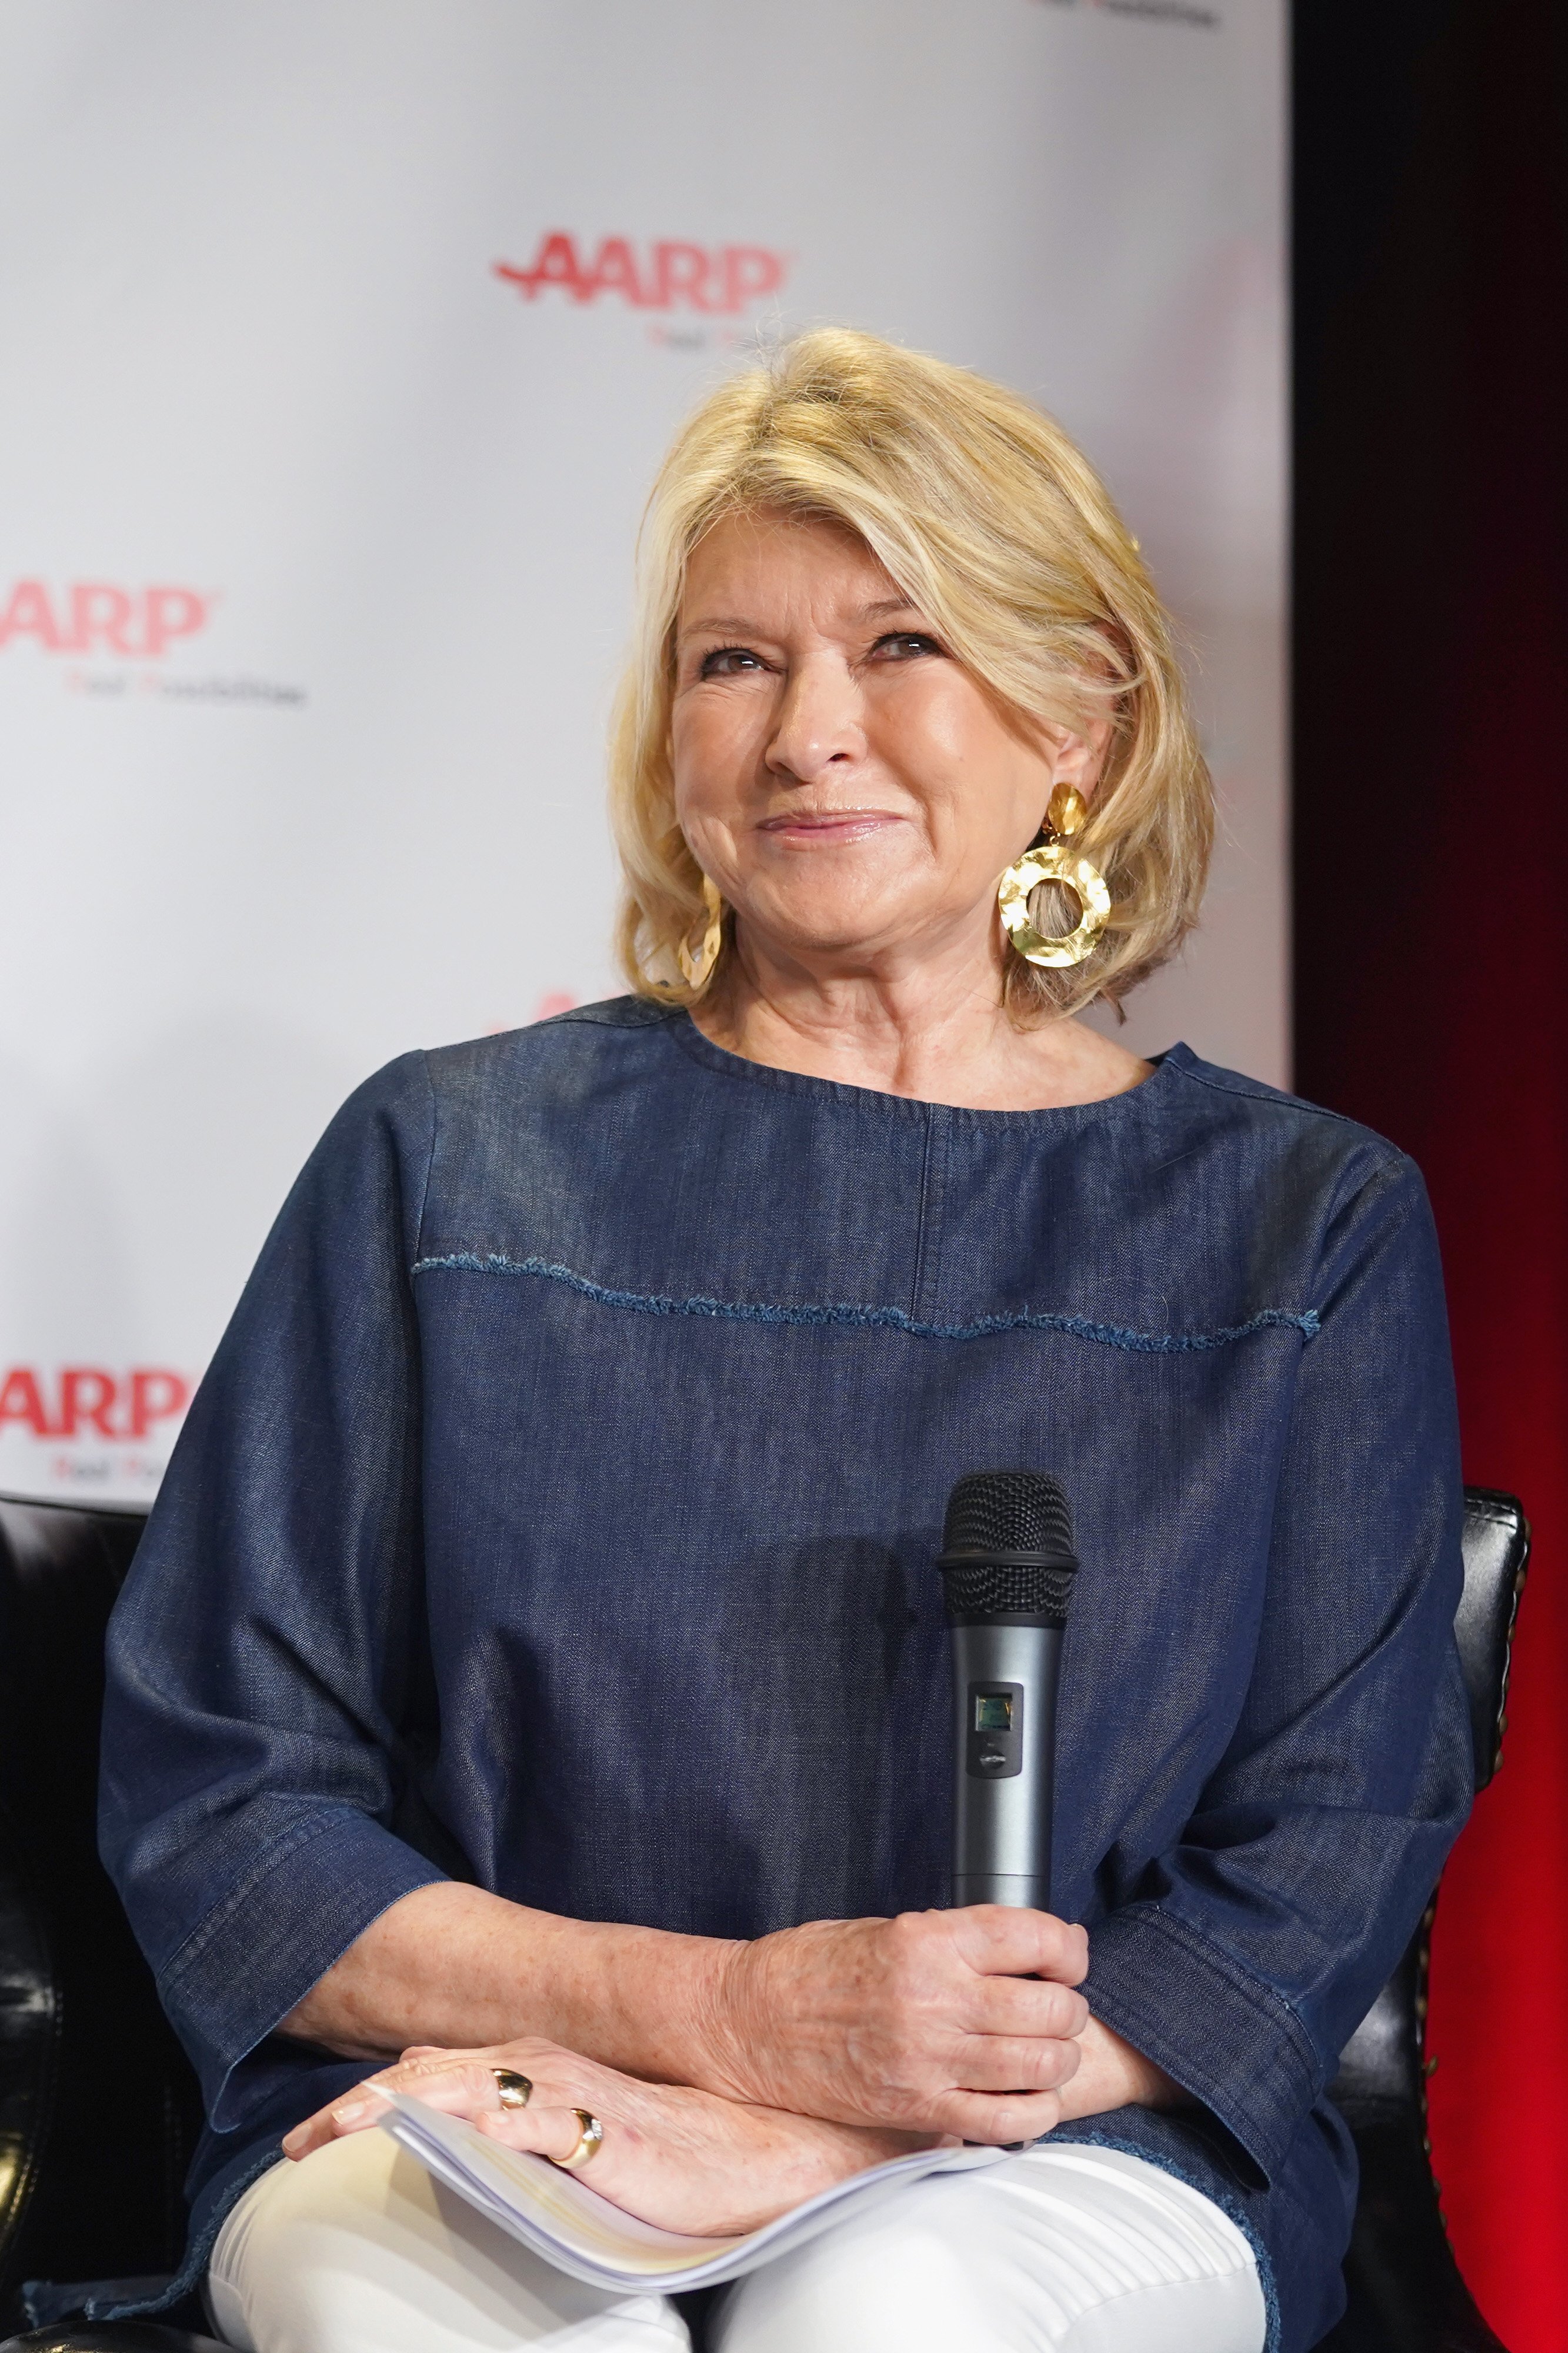 Martha Stewart speaks onstage during the 2019 SXSW Conference and Festivals on March 11, 2019, in Austin, Texas. | Source: Getty Images.